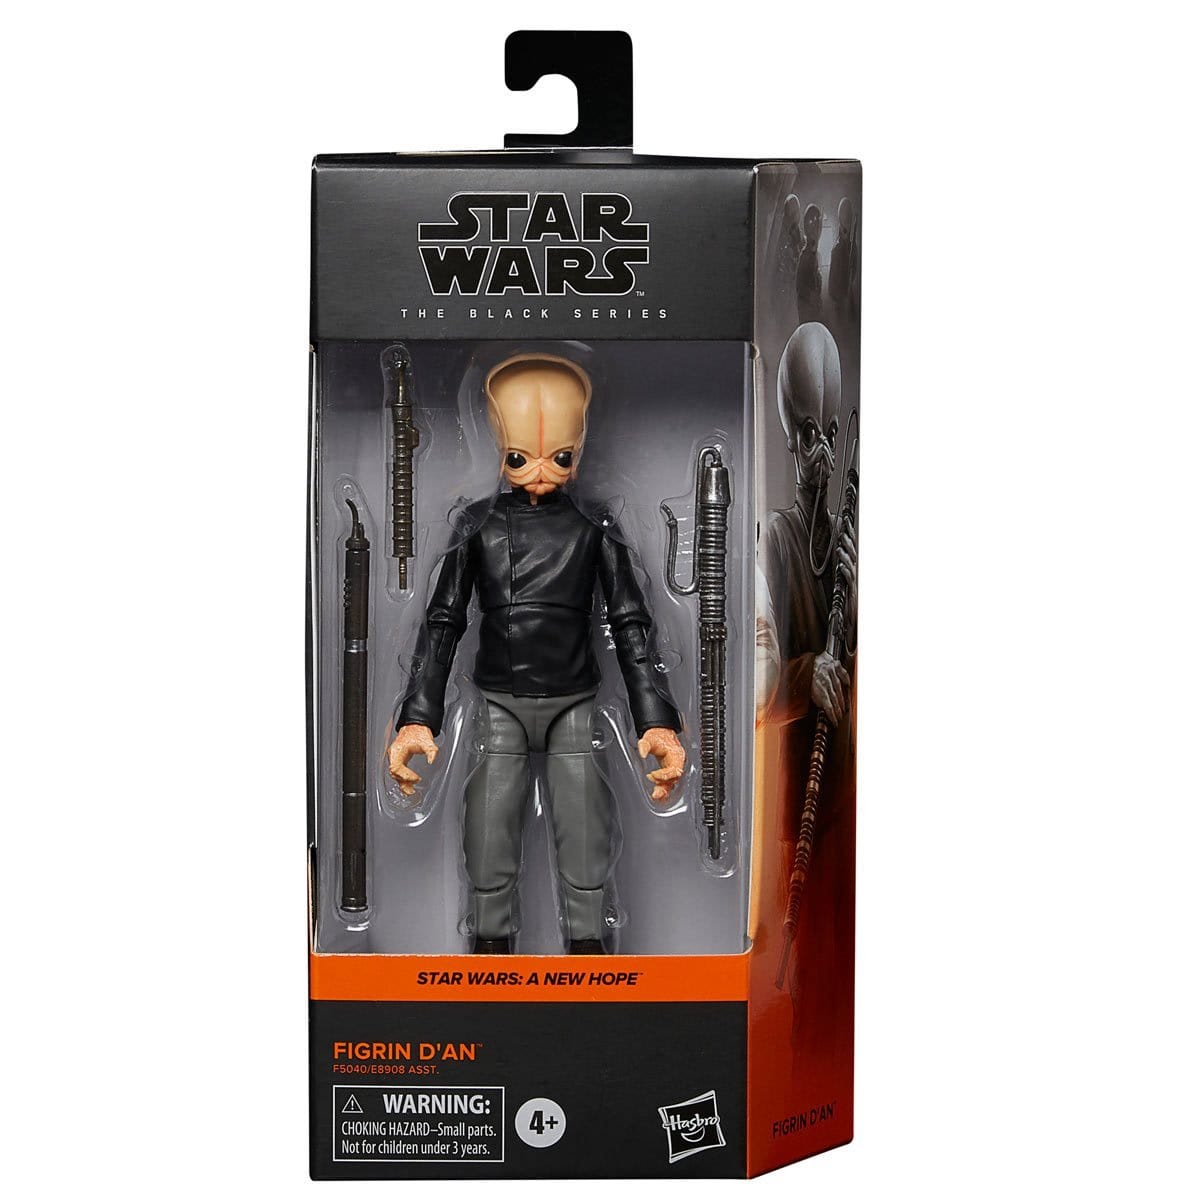 Star Wars The Black Series Figrin D'an 6" Action Figure Pop-O-Loco